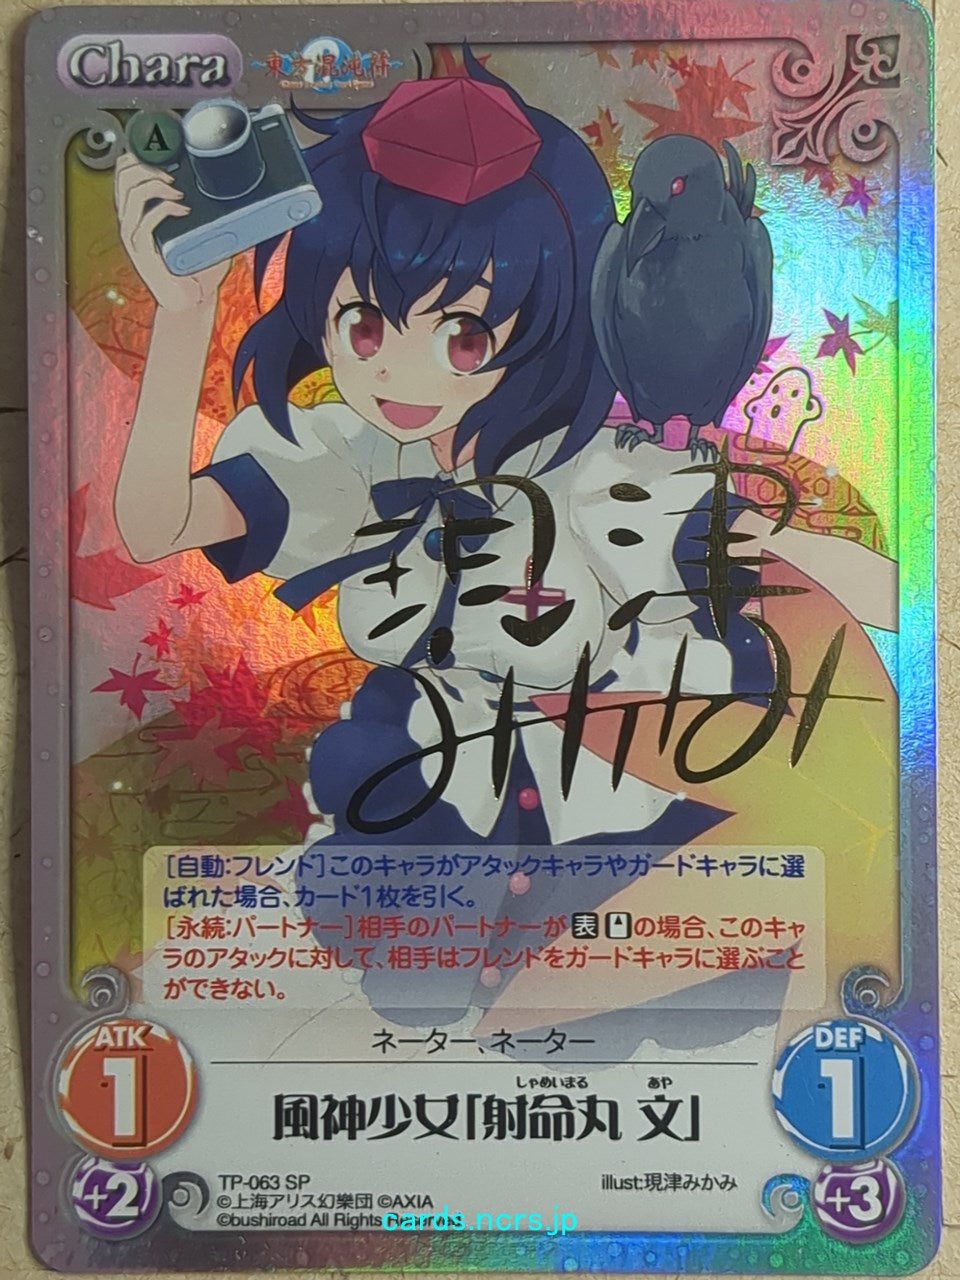 Chaos Touhou Project -Aya-   Trading Card CH/TP-063SP